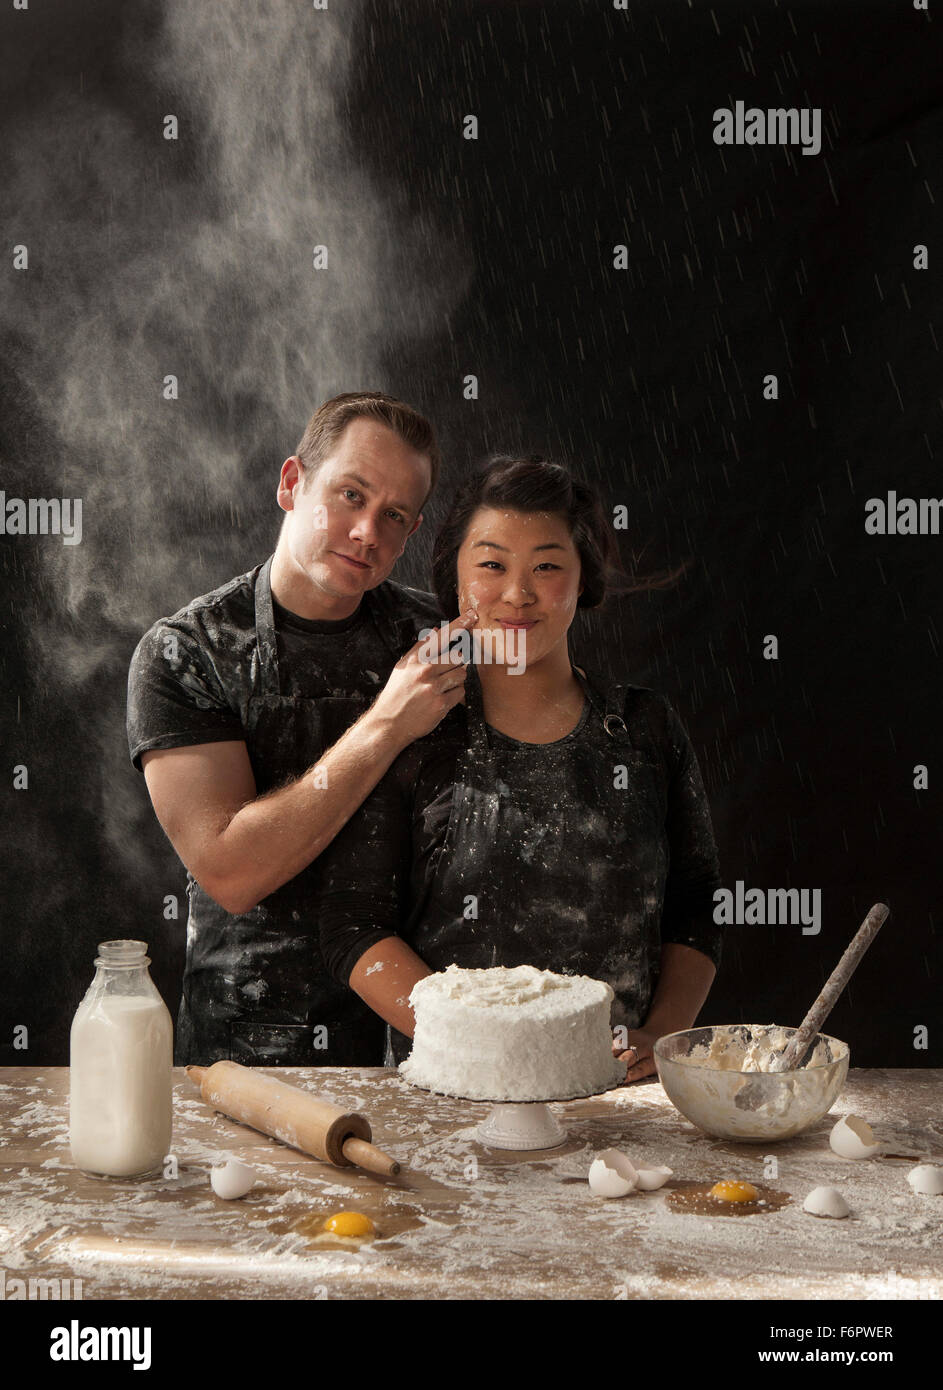 Messy couple baking cake Banque D'Images